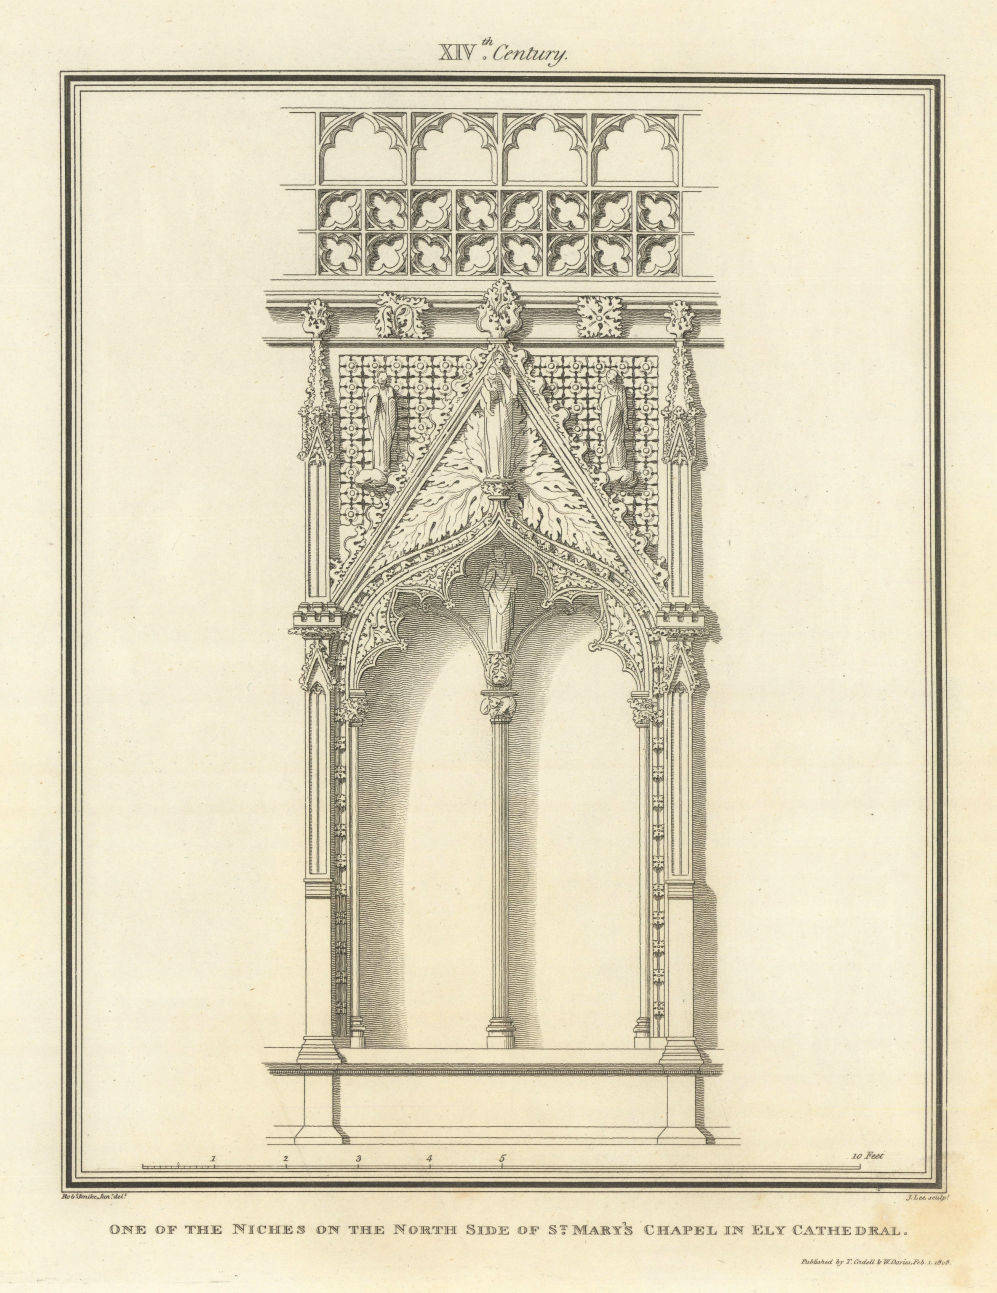 Niche on the north side of St. Mary's Chapel in Ely Cathedral. SMIRKE 1810